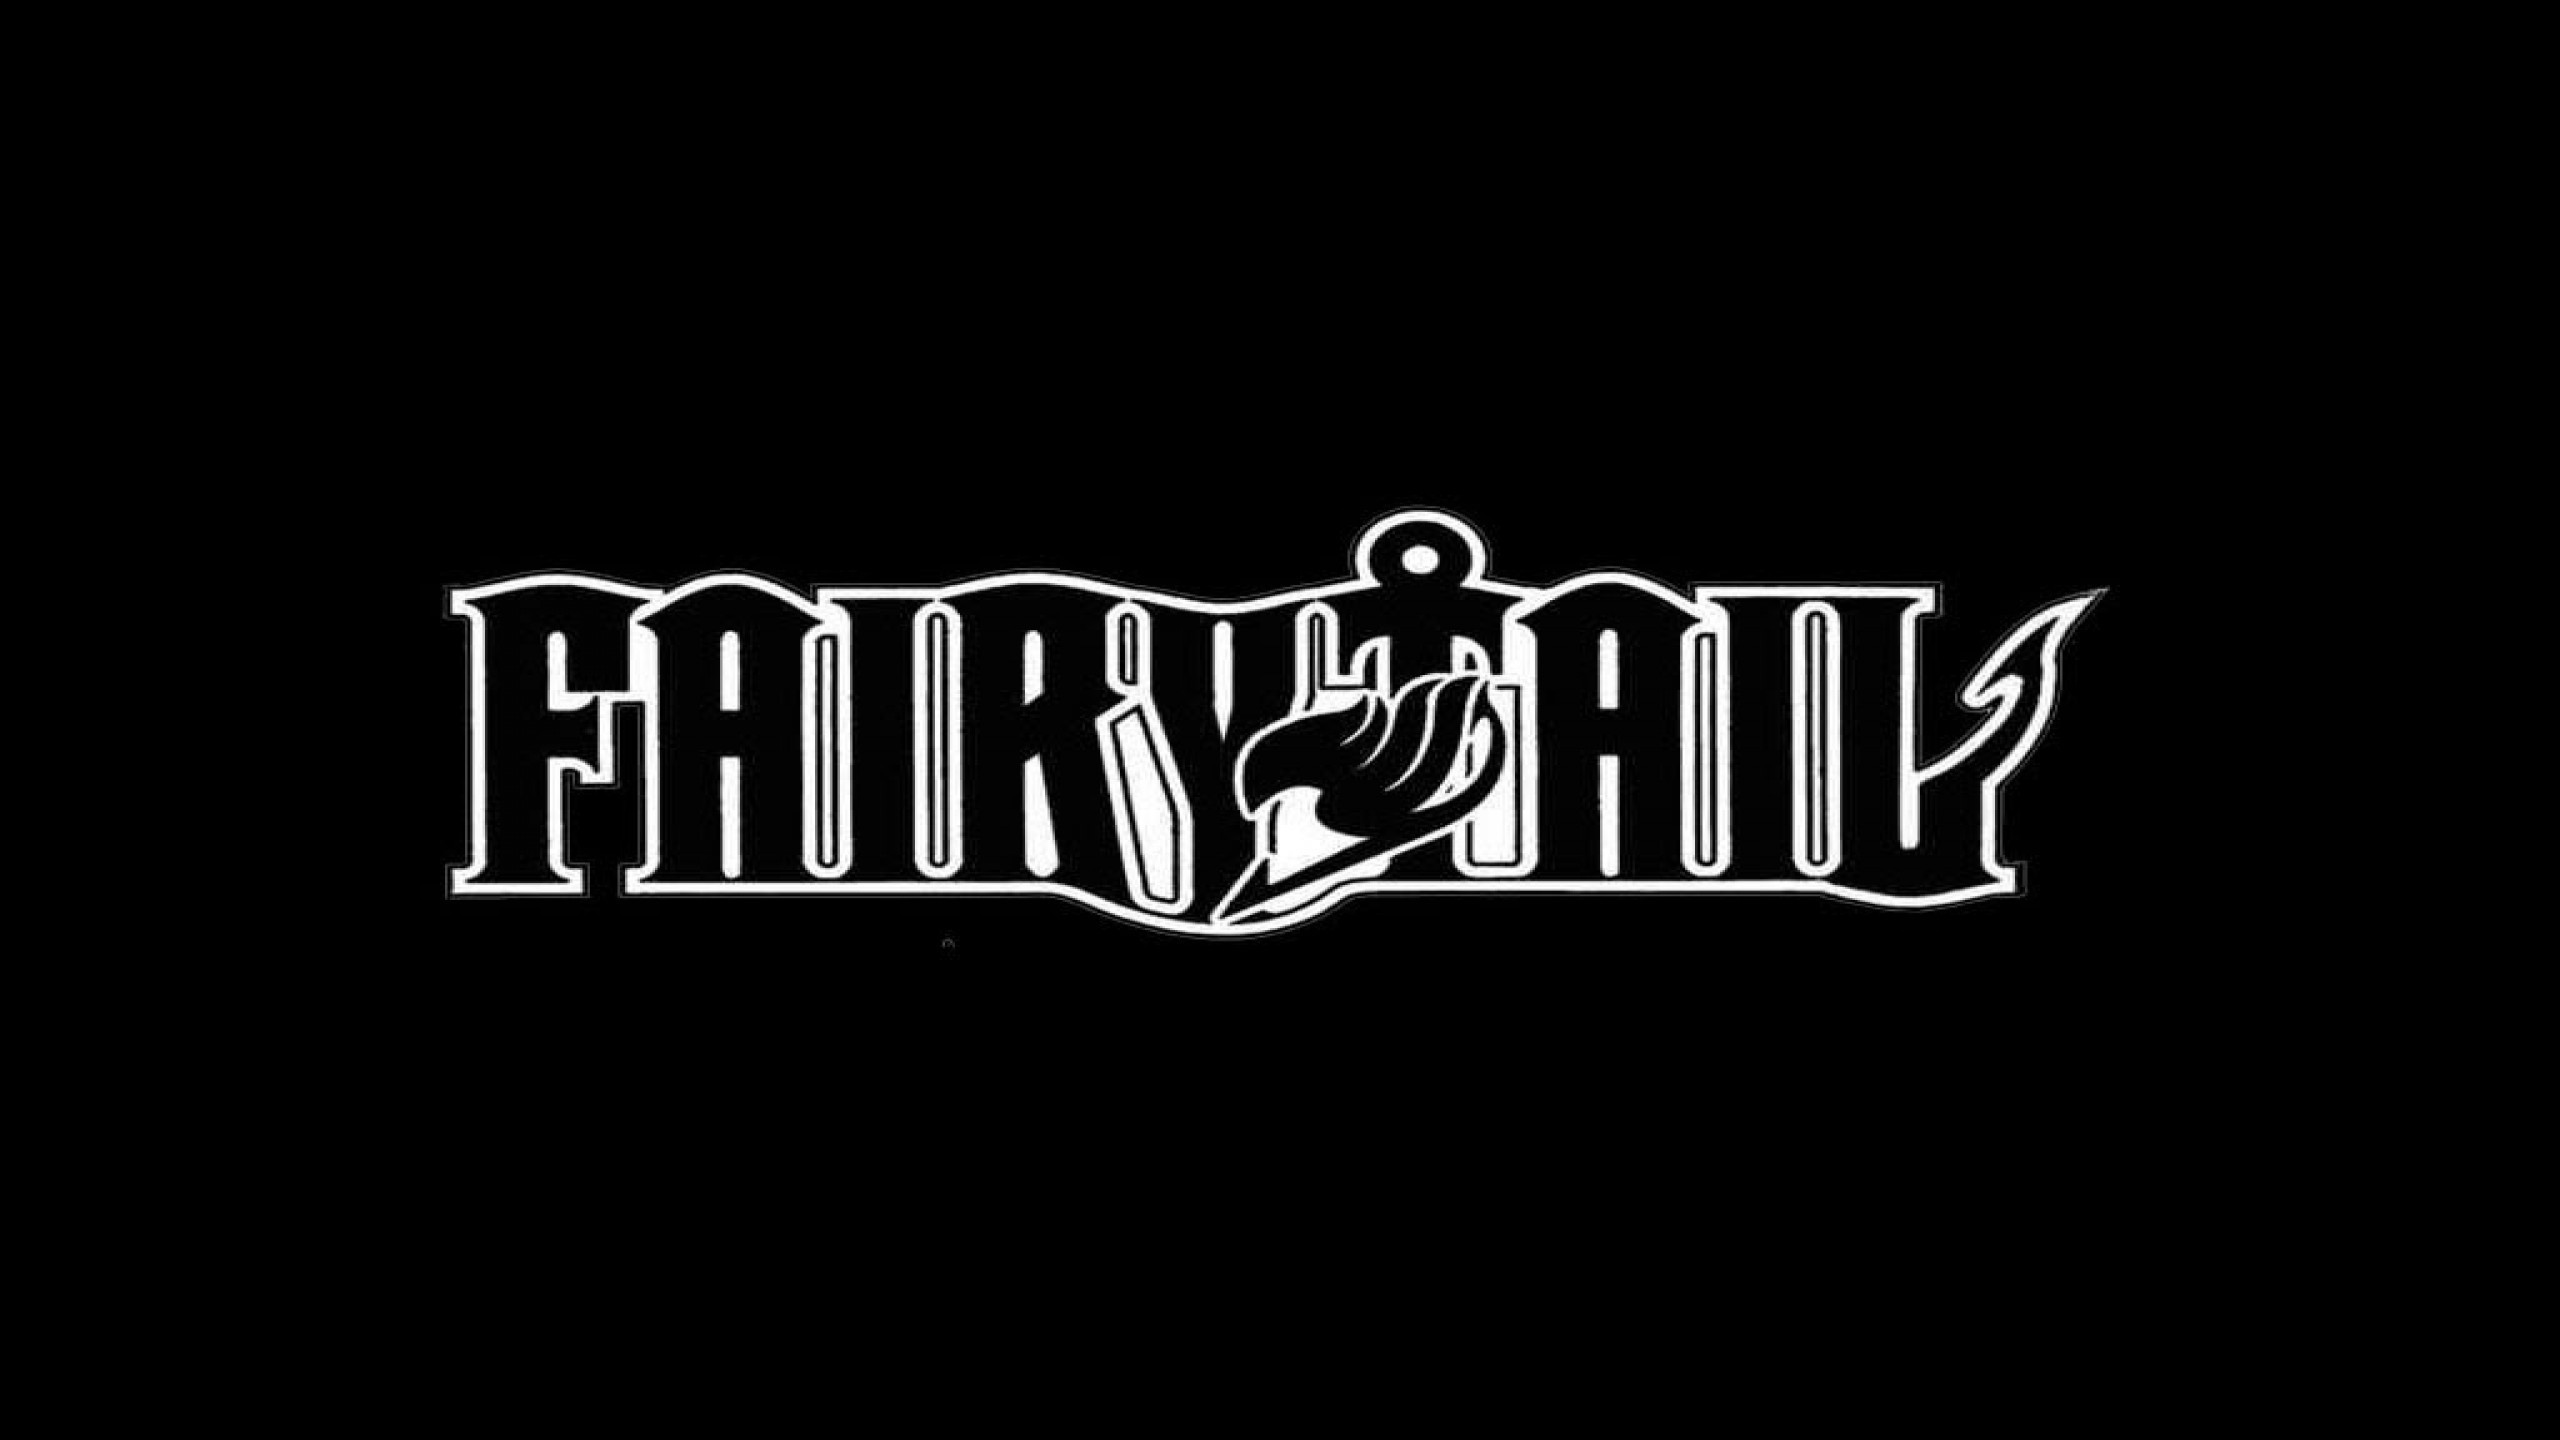 2560x1440  fairy tail logo wallpapers iphone with high resolution wallpaper  on brands & logos category similar with